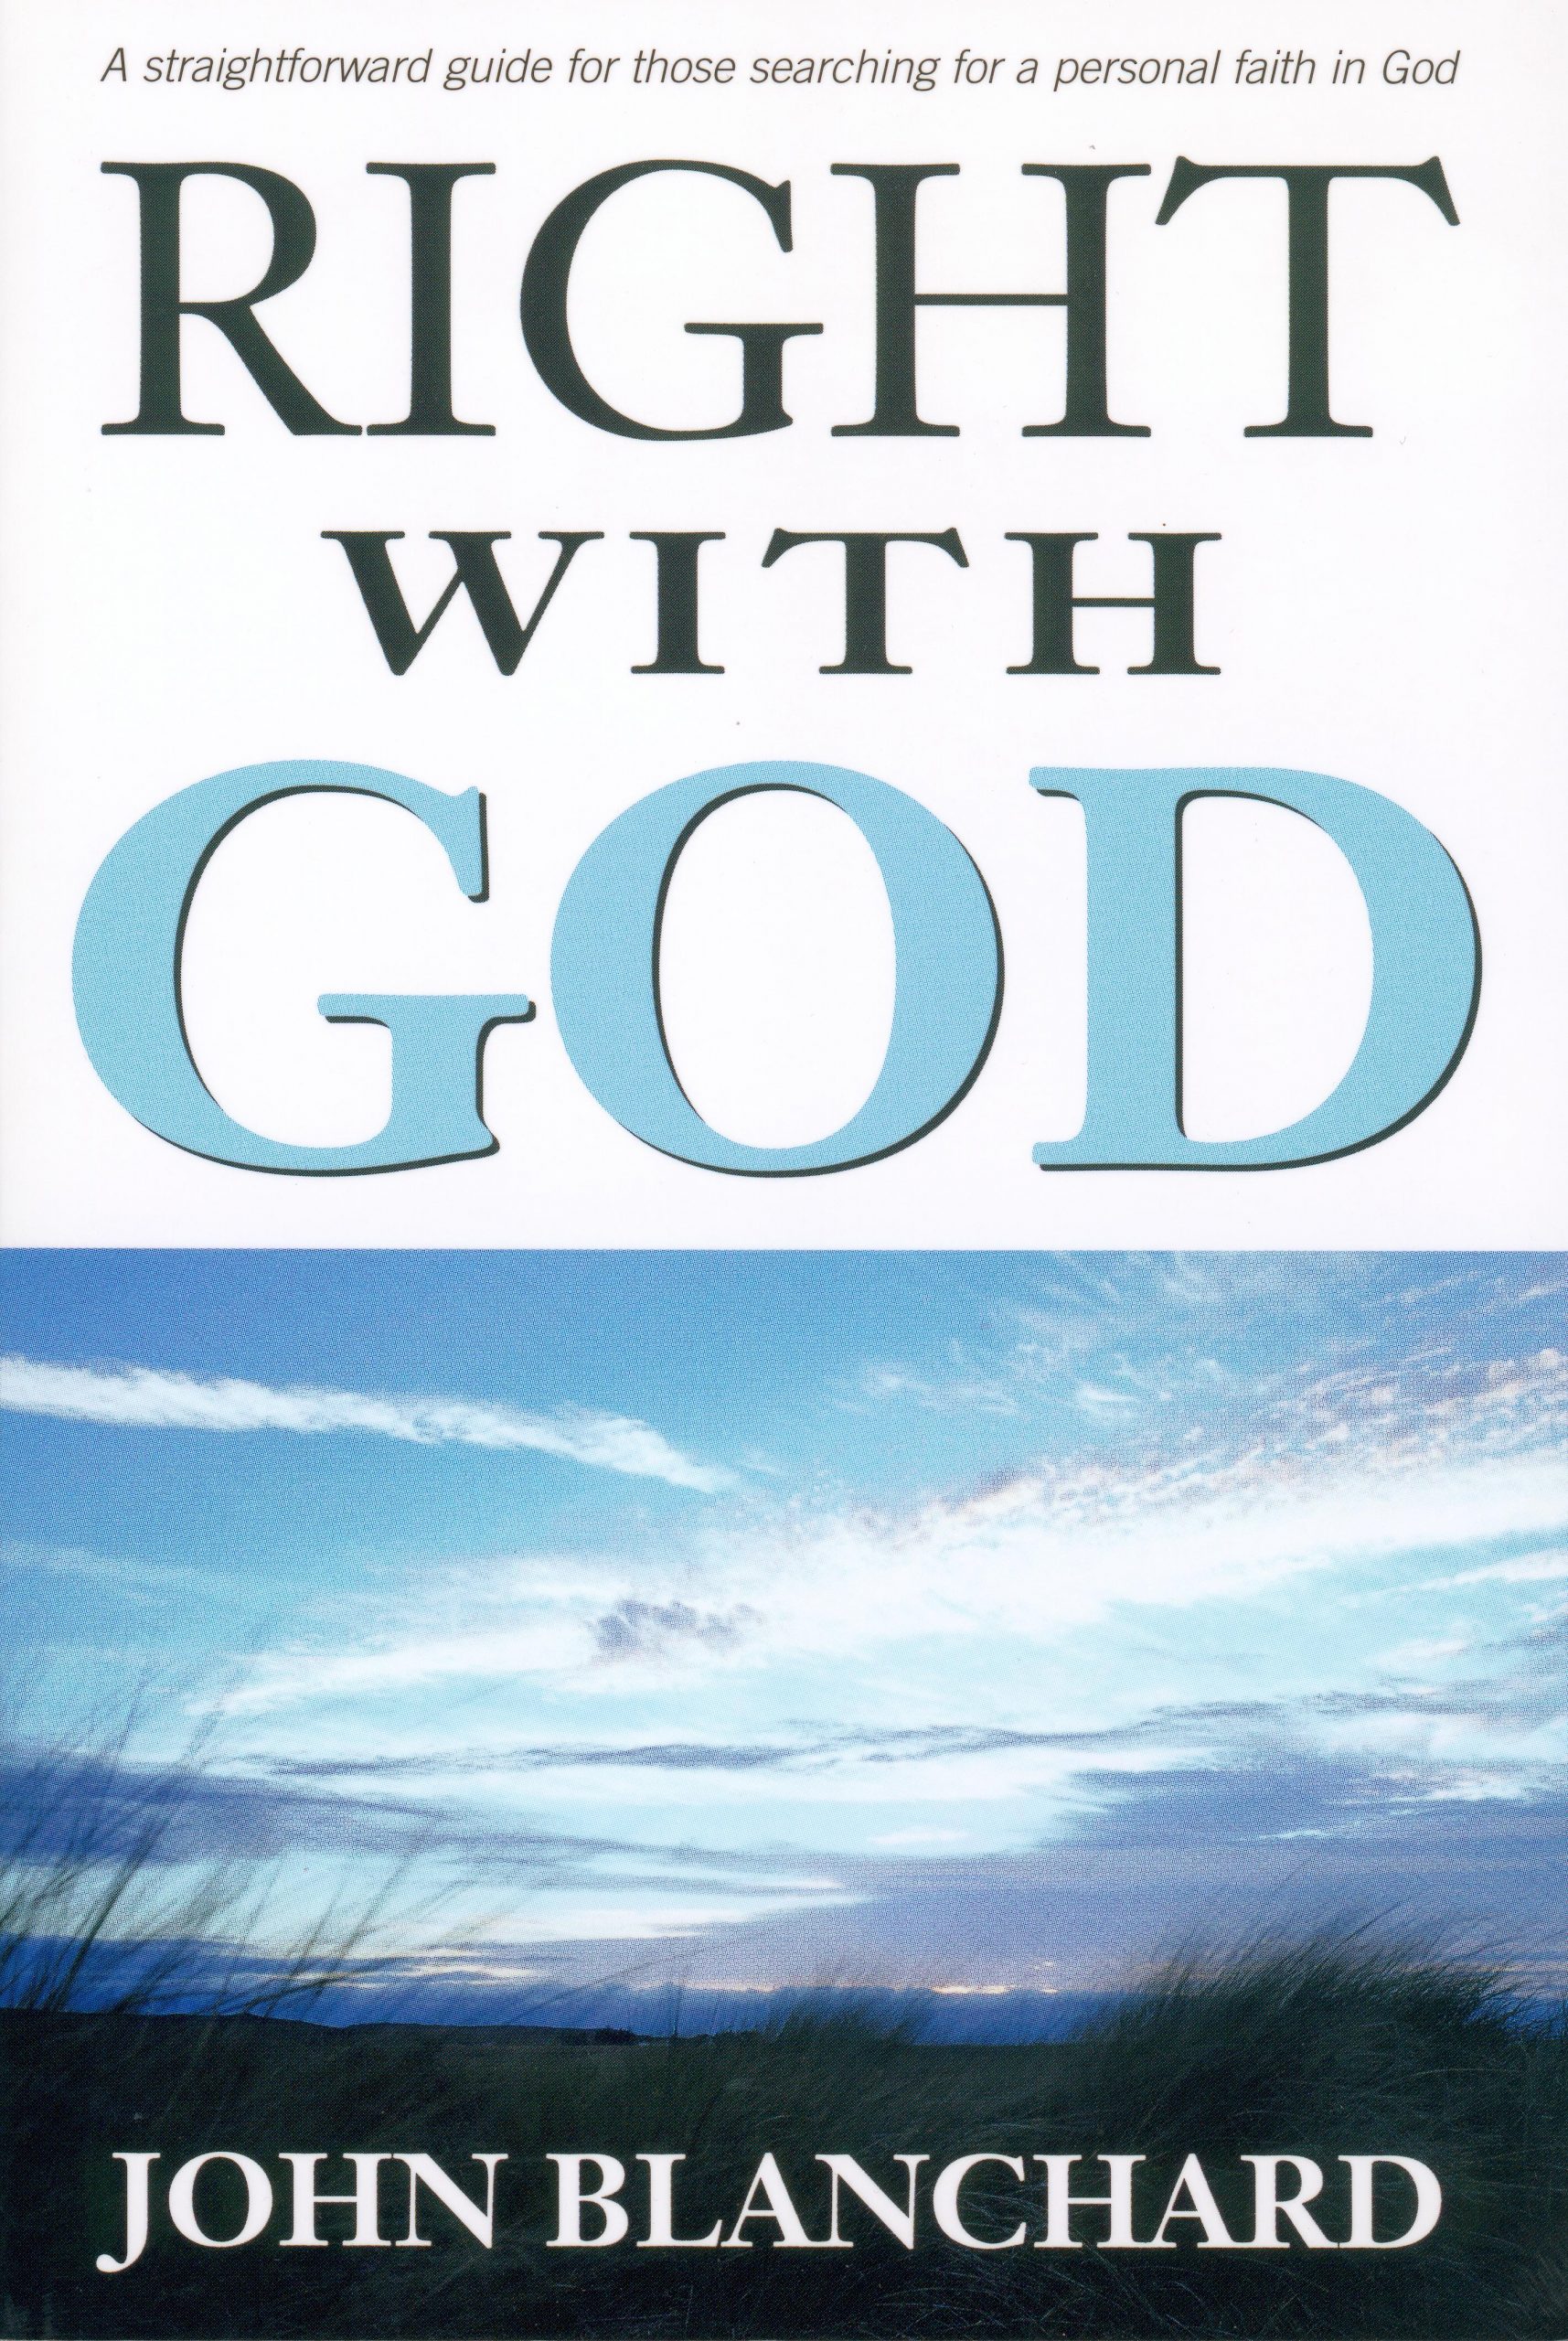 https://banneroftruth.org/us/wp-content/uploads/sites/2/2013/06/Right-with-God-2007-front-cover-600dpi-scaled.jpg